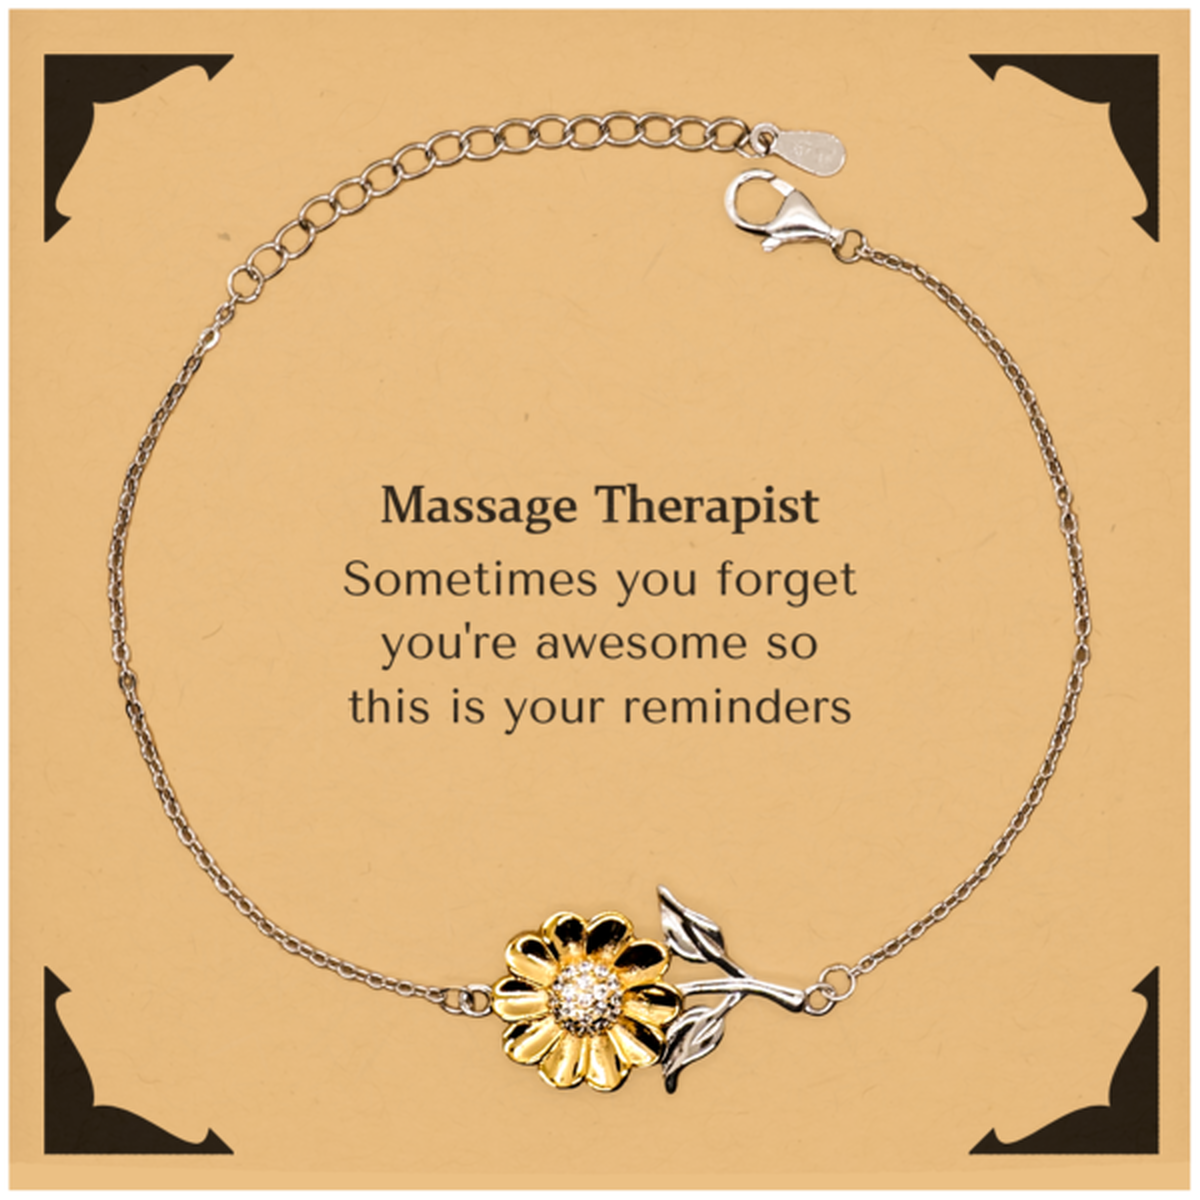 Sentimental Massage Therapist Sunflower Bracelet, Massage Therapist Sometimes you forget you're awesome so this is your reminders, Graduation Christmas Birthday Gifts for Massage Therapist, Men, Women, Coworkers